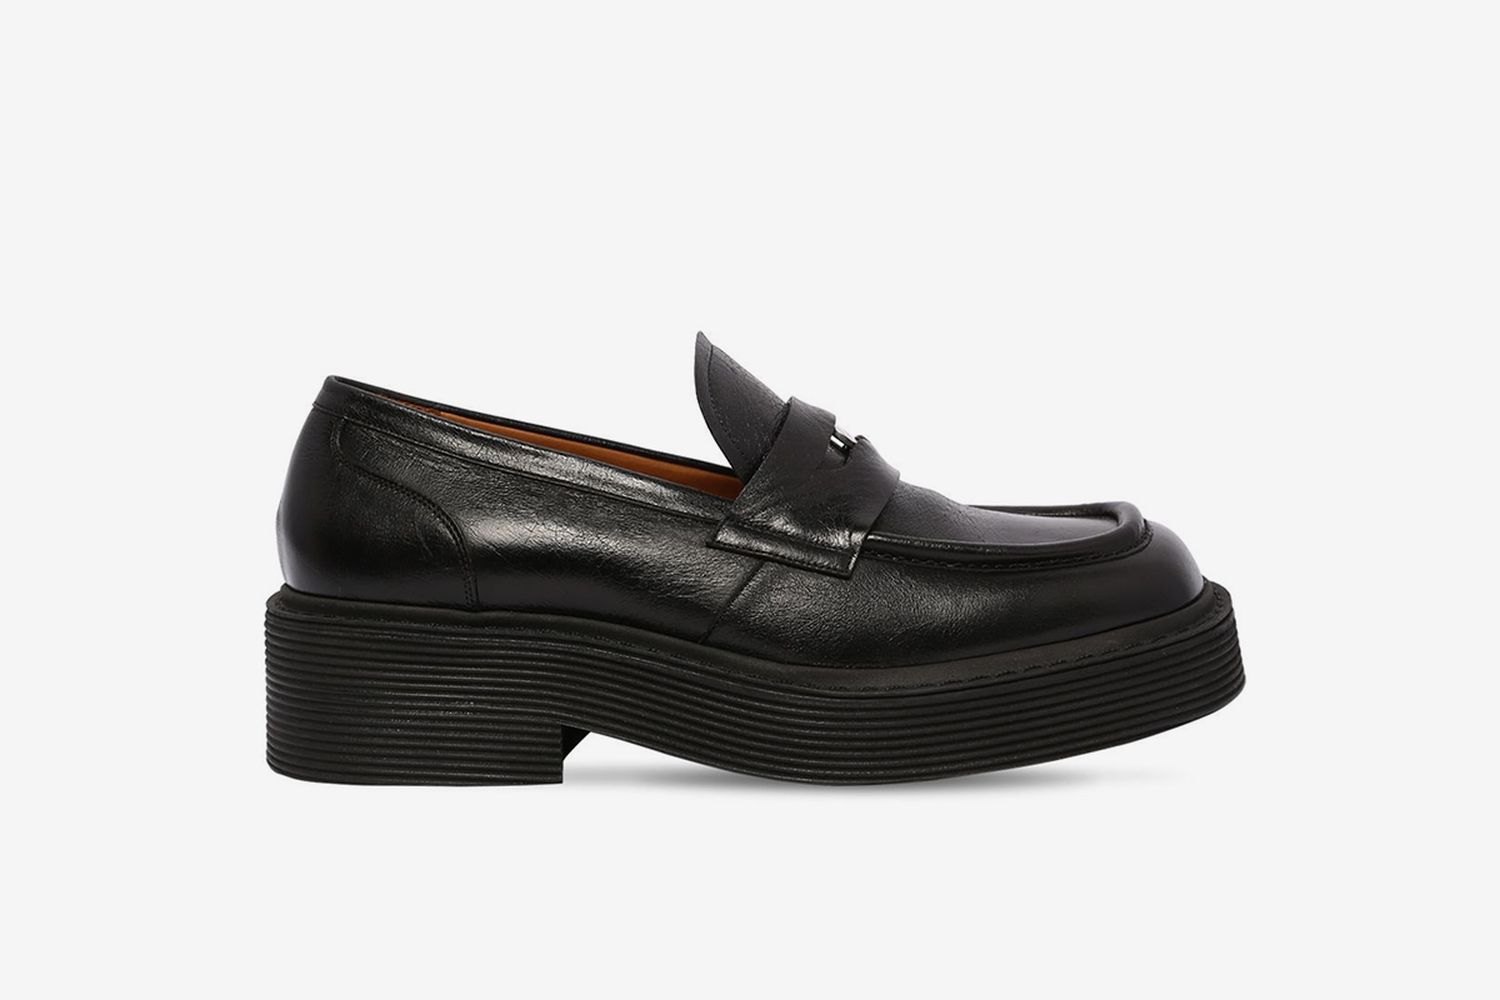 New Forest Coin Leather Penny Loafers